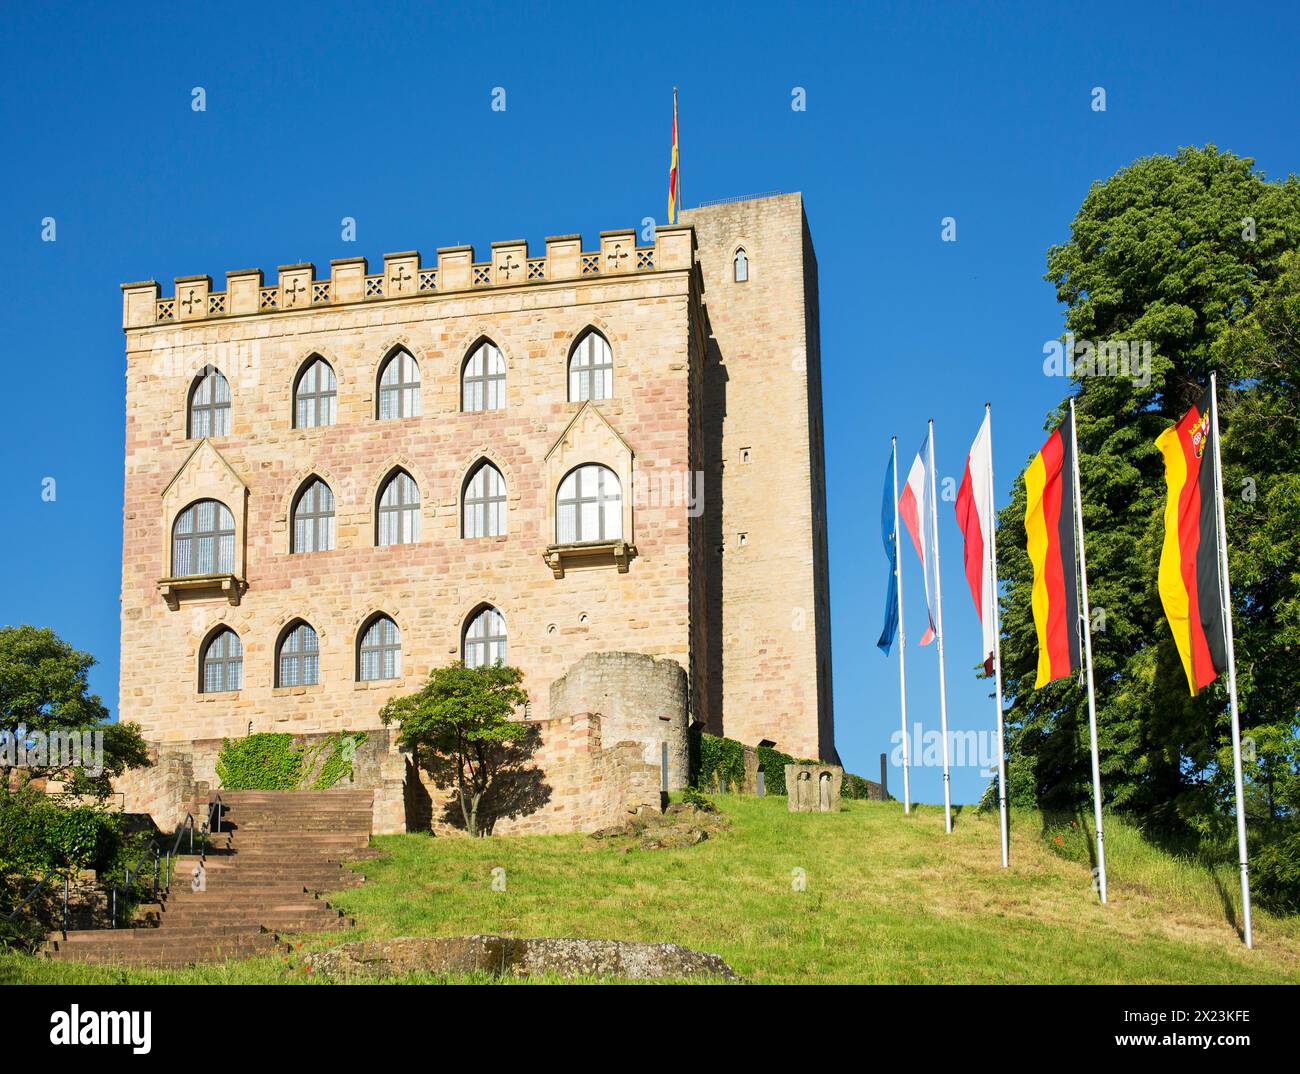 The east facade of Hambach Castle in Neustadt an der Weinstrasse, Rhineland-Palatinate, Germany Stock Photo